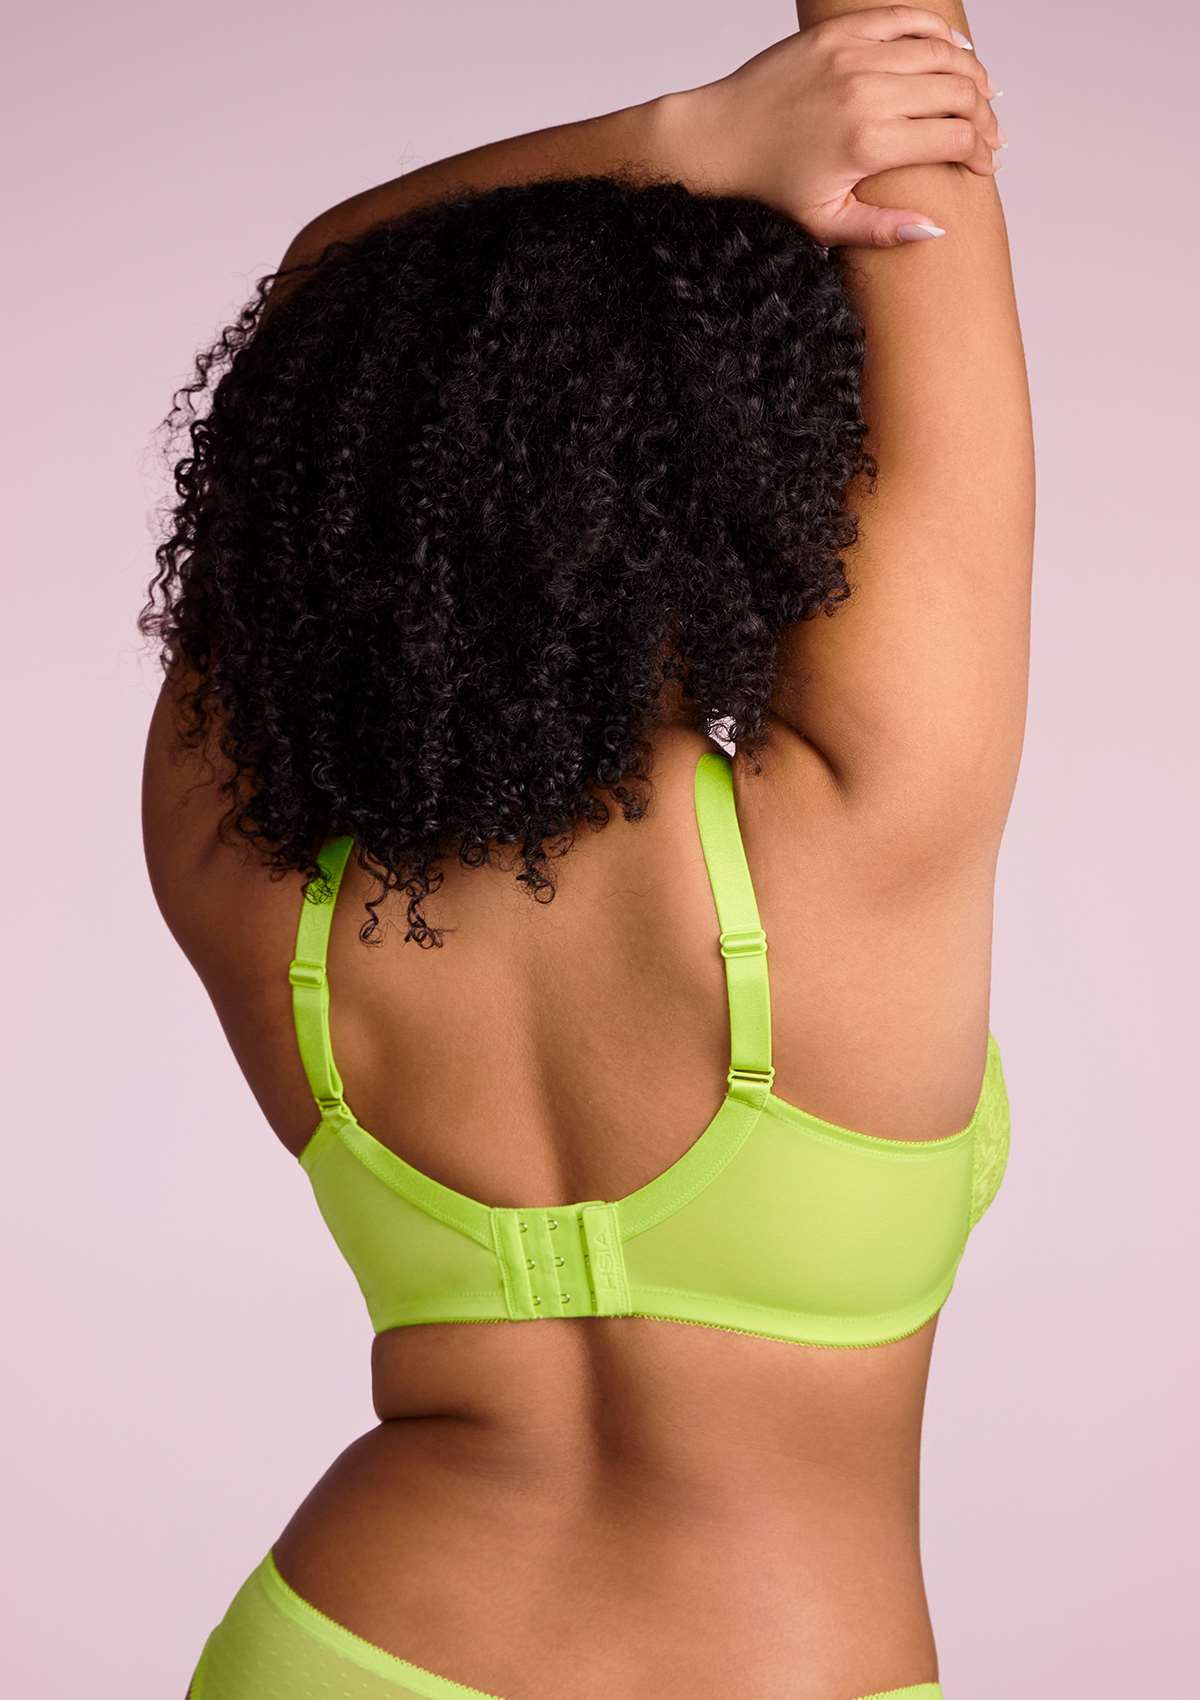 HSIA Enchante Full Cup Minimizing Bra: Supportive Unlined Lace Bra - Lime Green / 36 / H